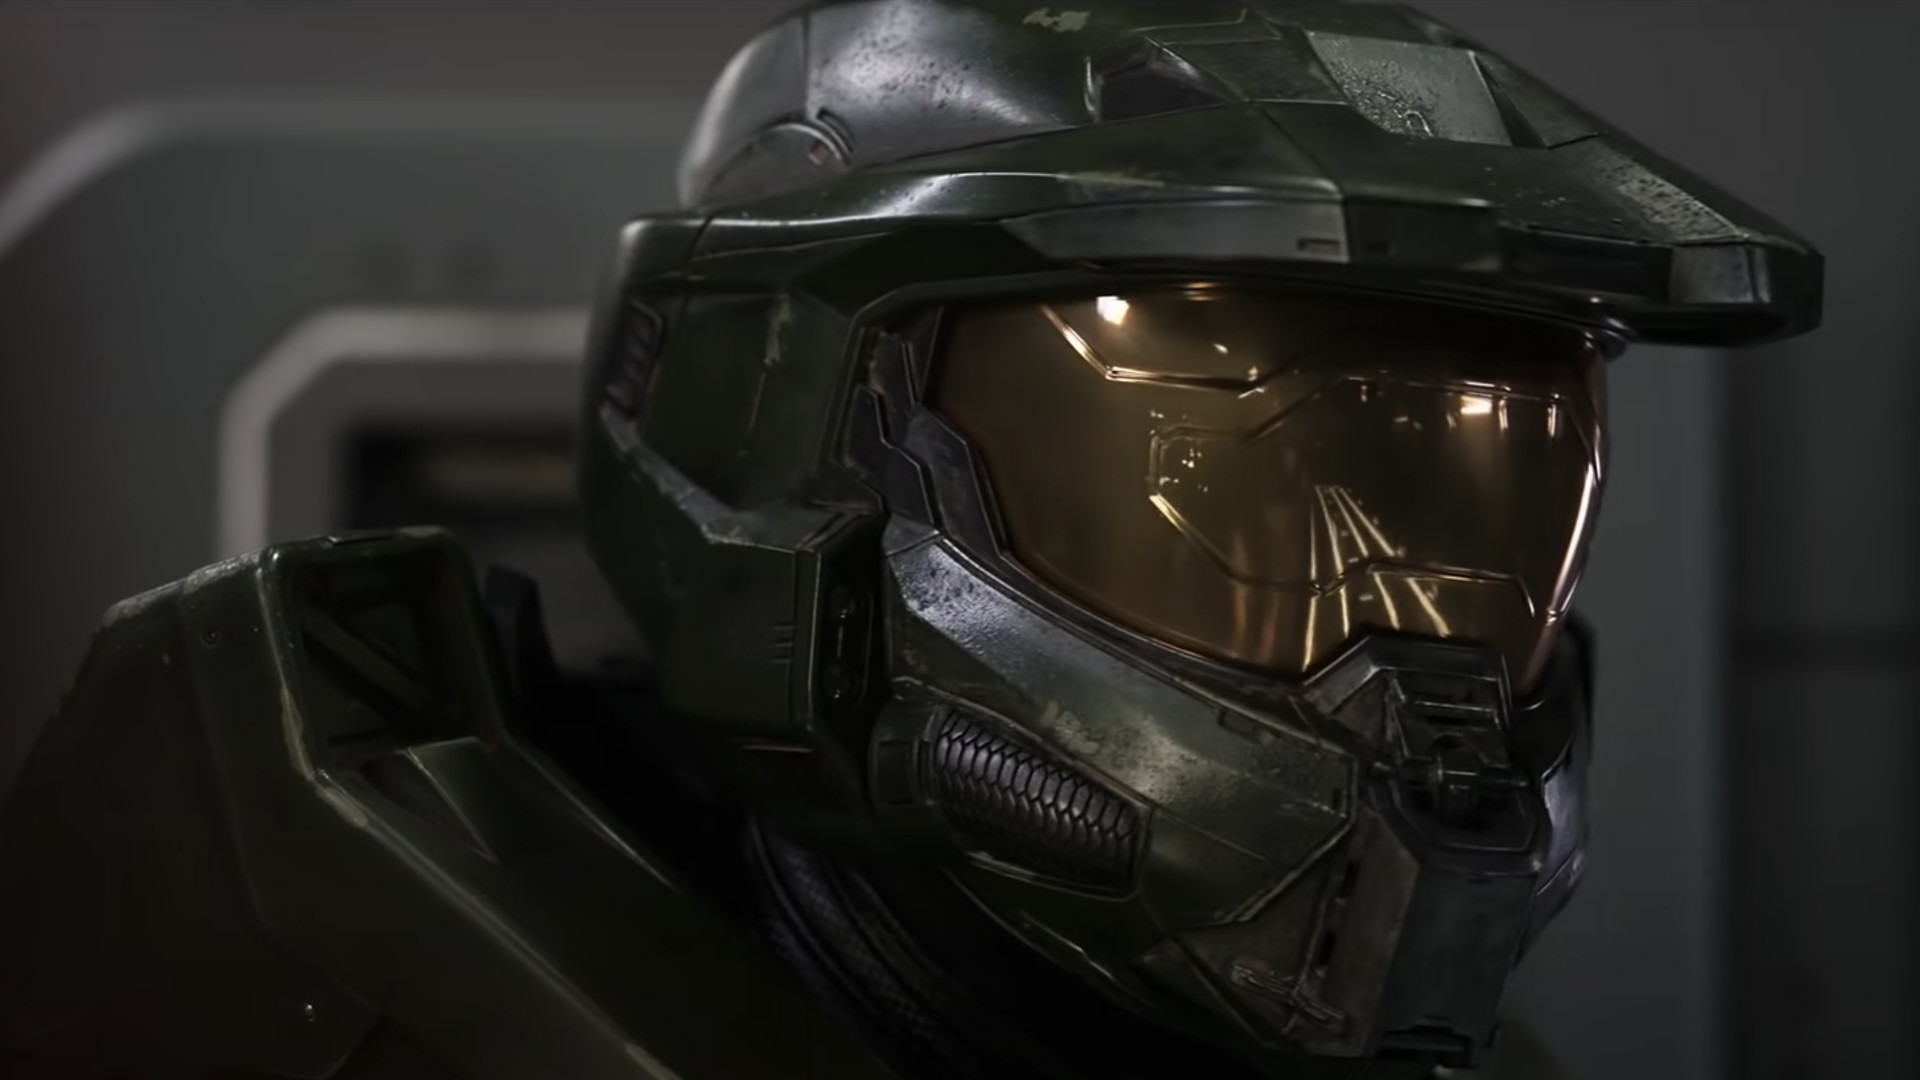 Halo TV series: Channel 5 release date, episodes, and more